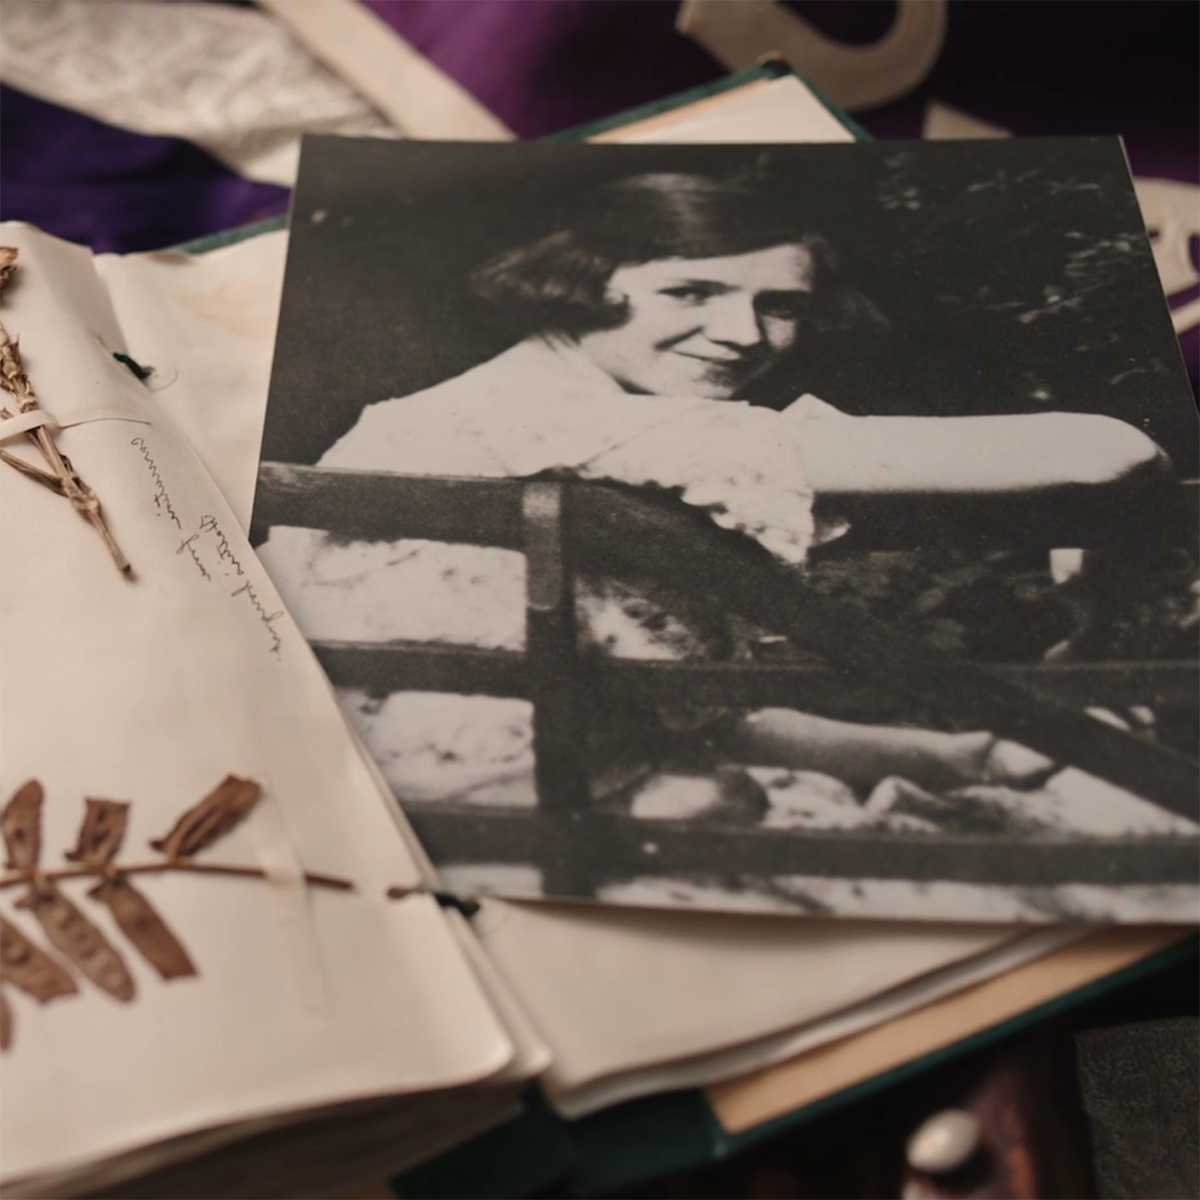 Close-up photo of a scrapbook with dried flowers and a black and white photo clipping of Rachel Carson